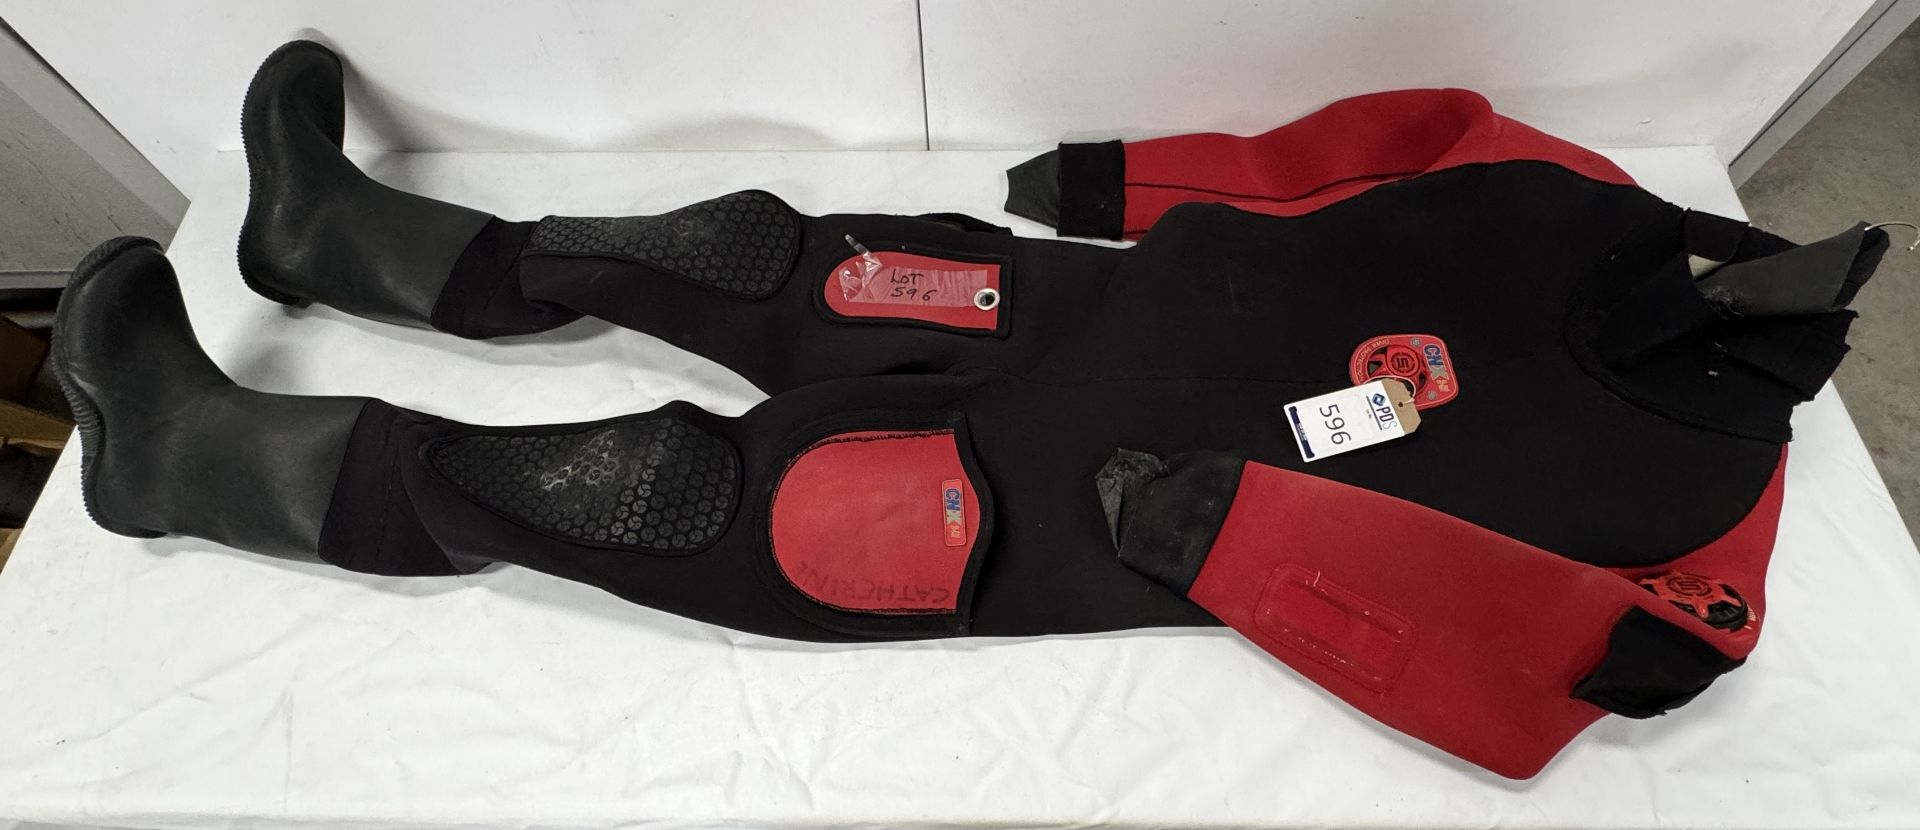 Northern Diver CNX2-RI DrySuit, Red/Black, including Hard Sole Boots (Size MLT) (Location: